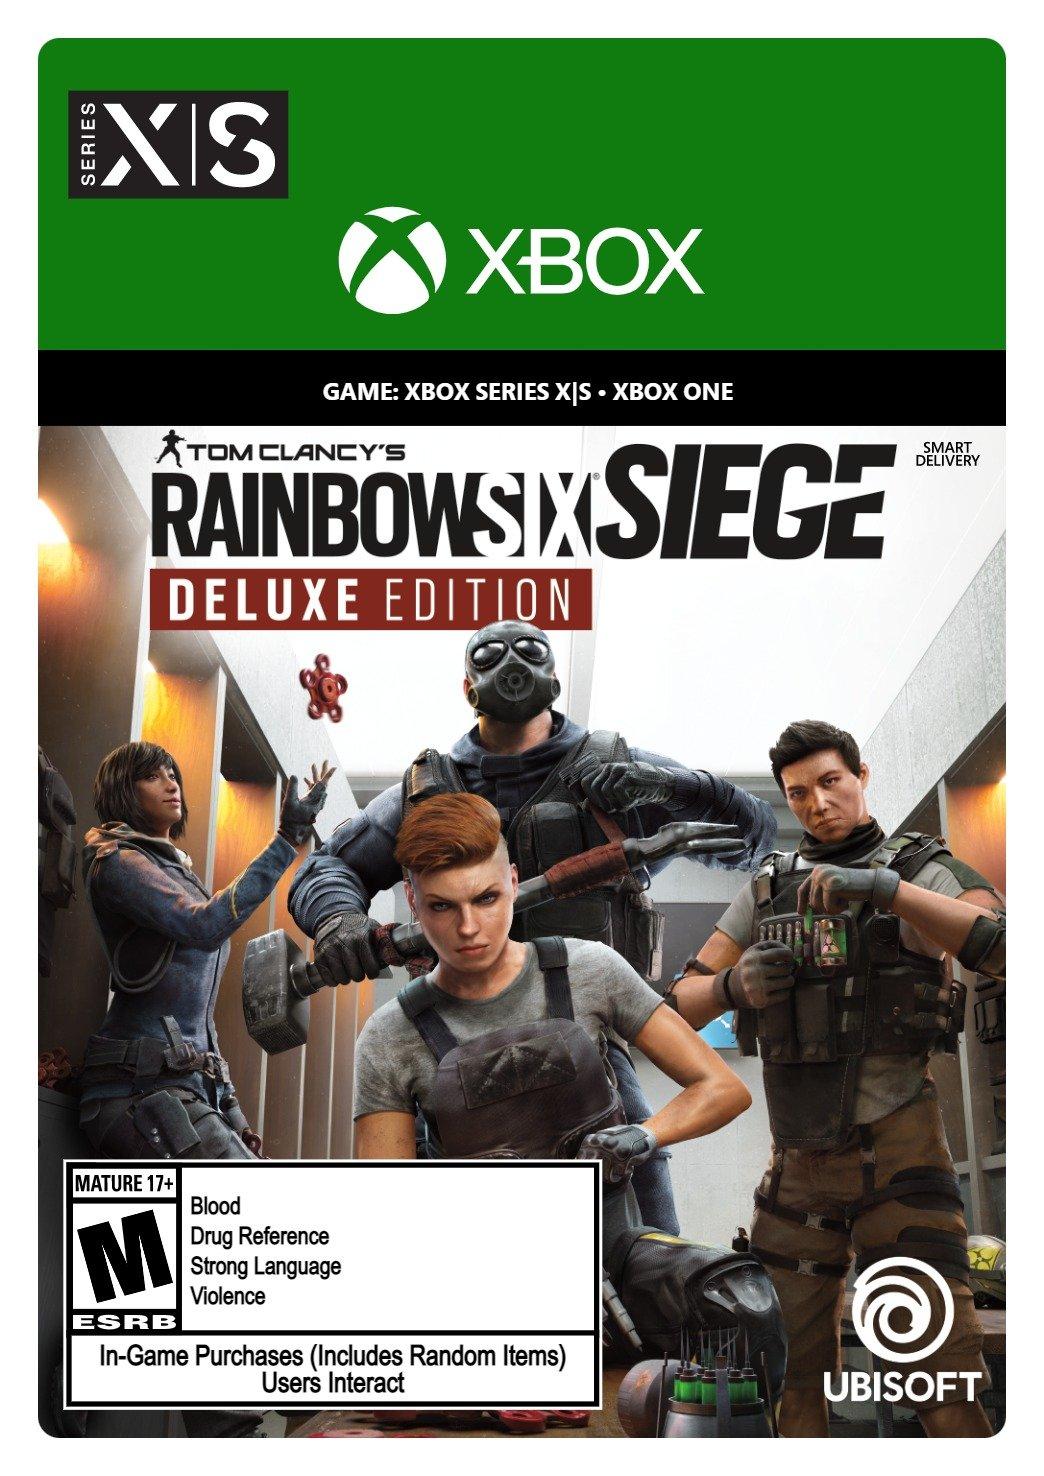 Tom Clancy\'s Rainbow Six: Siege Deluxe Deluxe Edition - PlayStation 5 | PlayStation  5 | GameStop